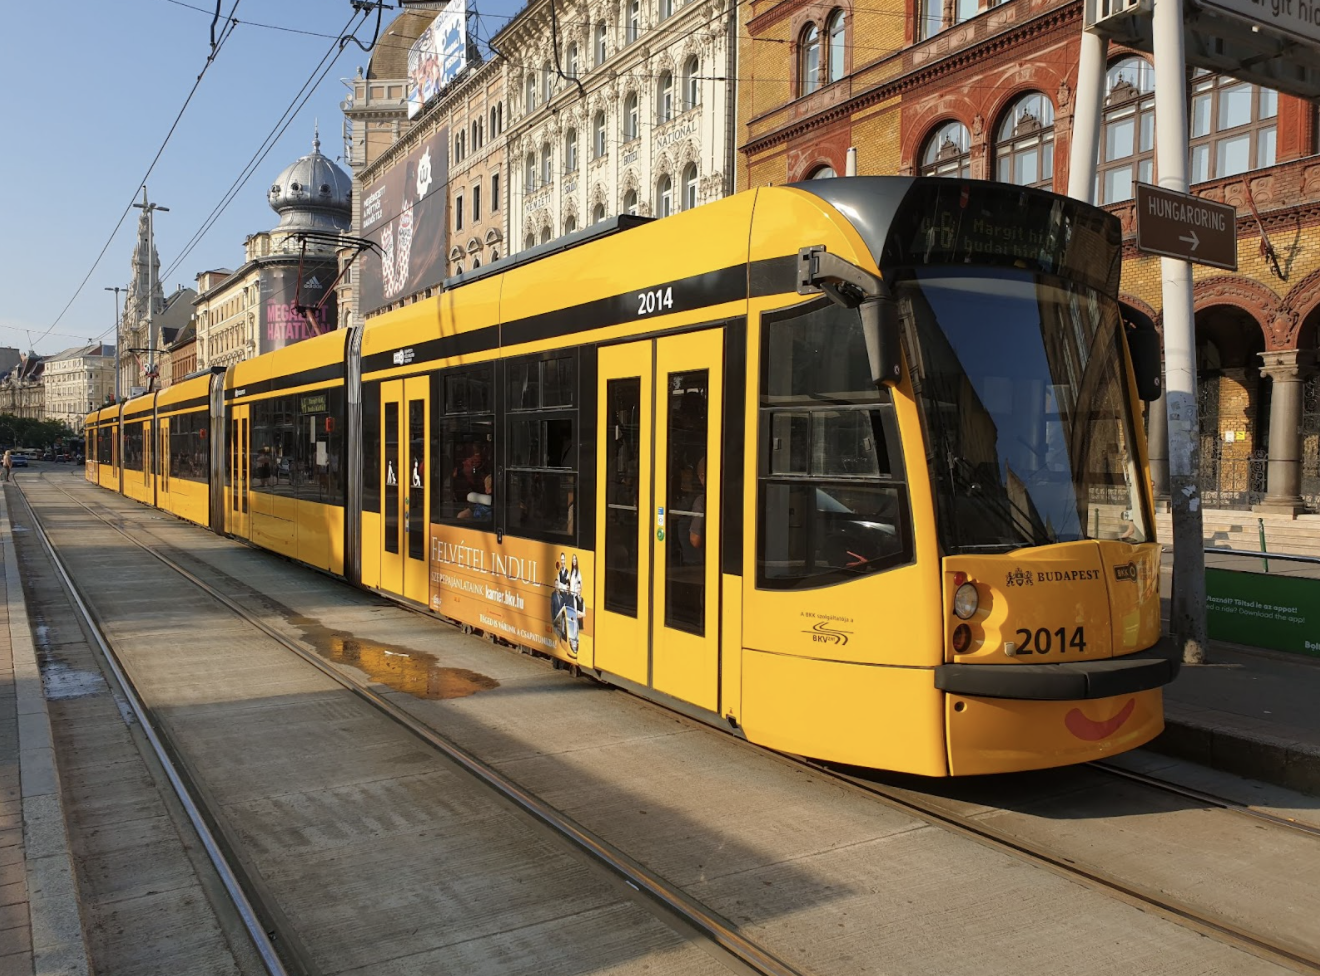 budapest streetcar. yellow and black in color and more modern